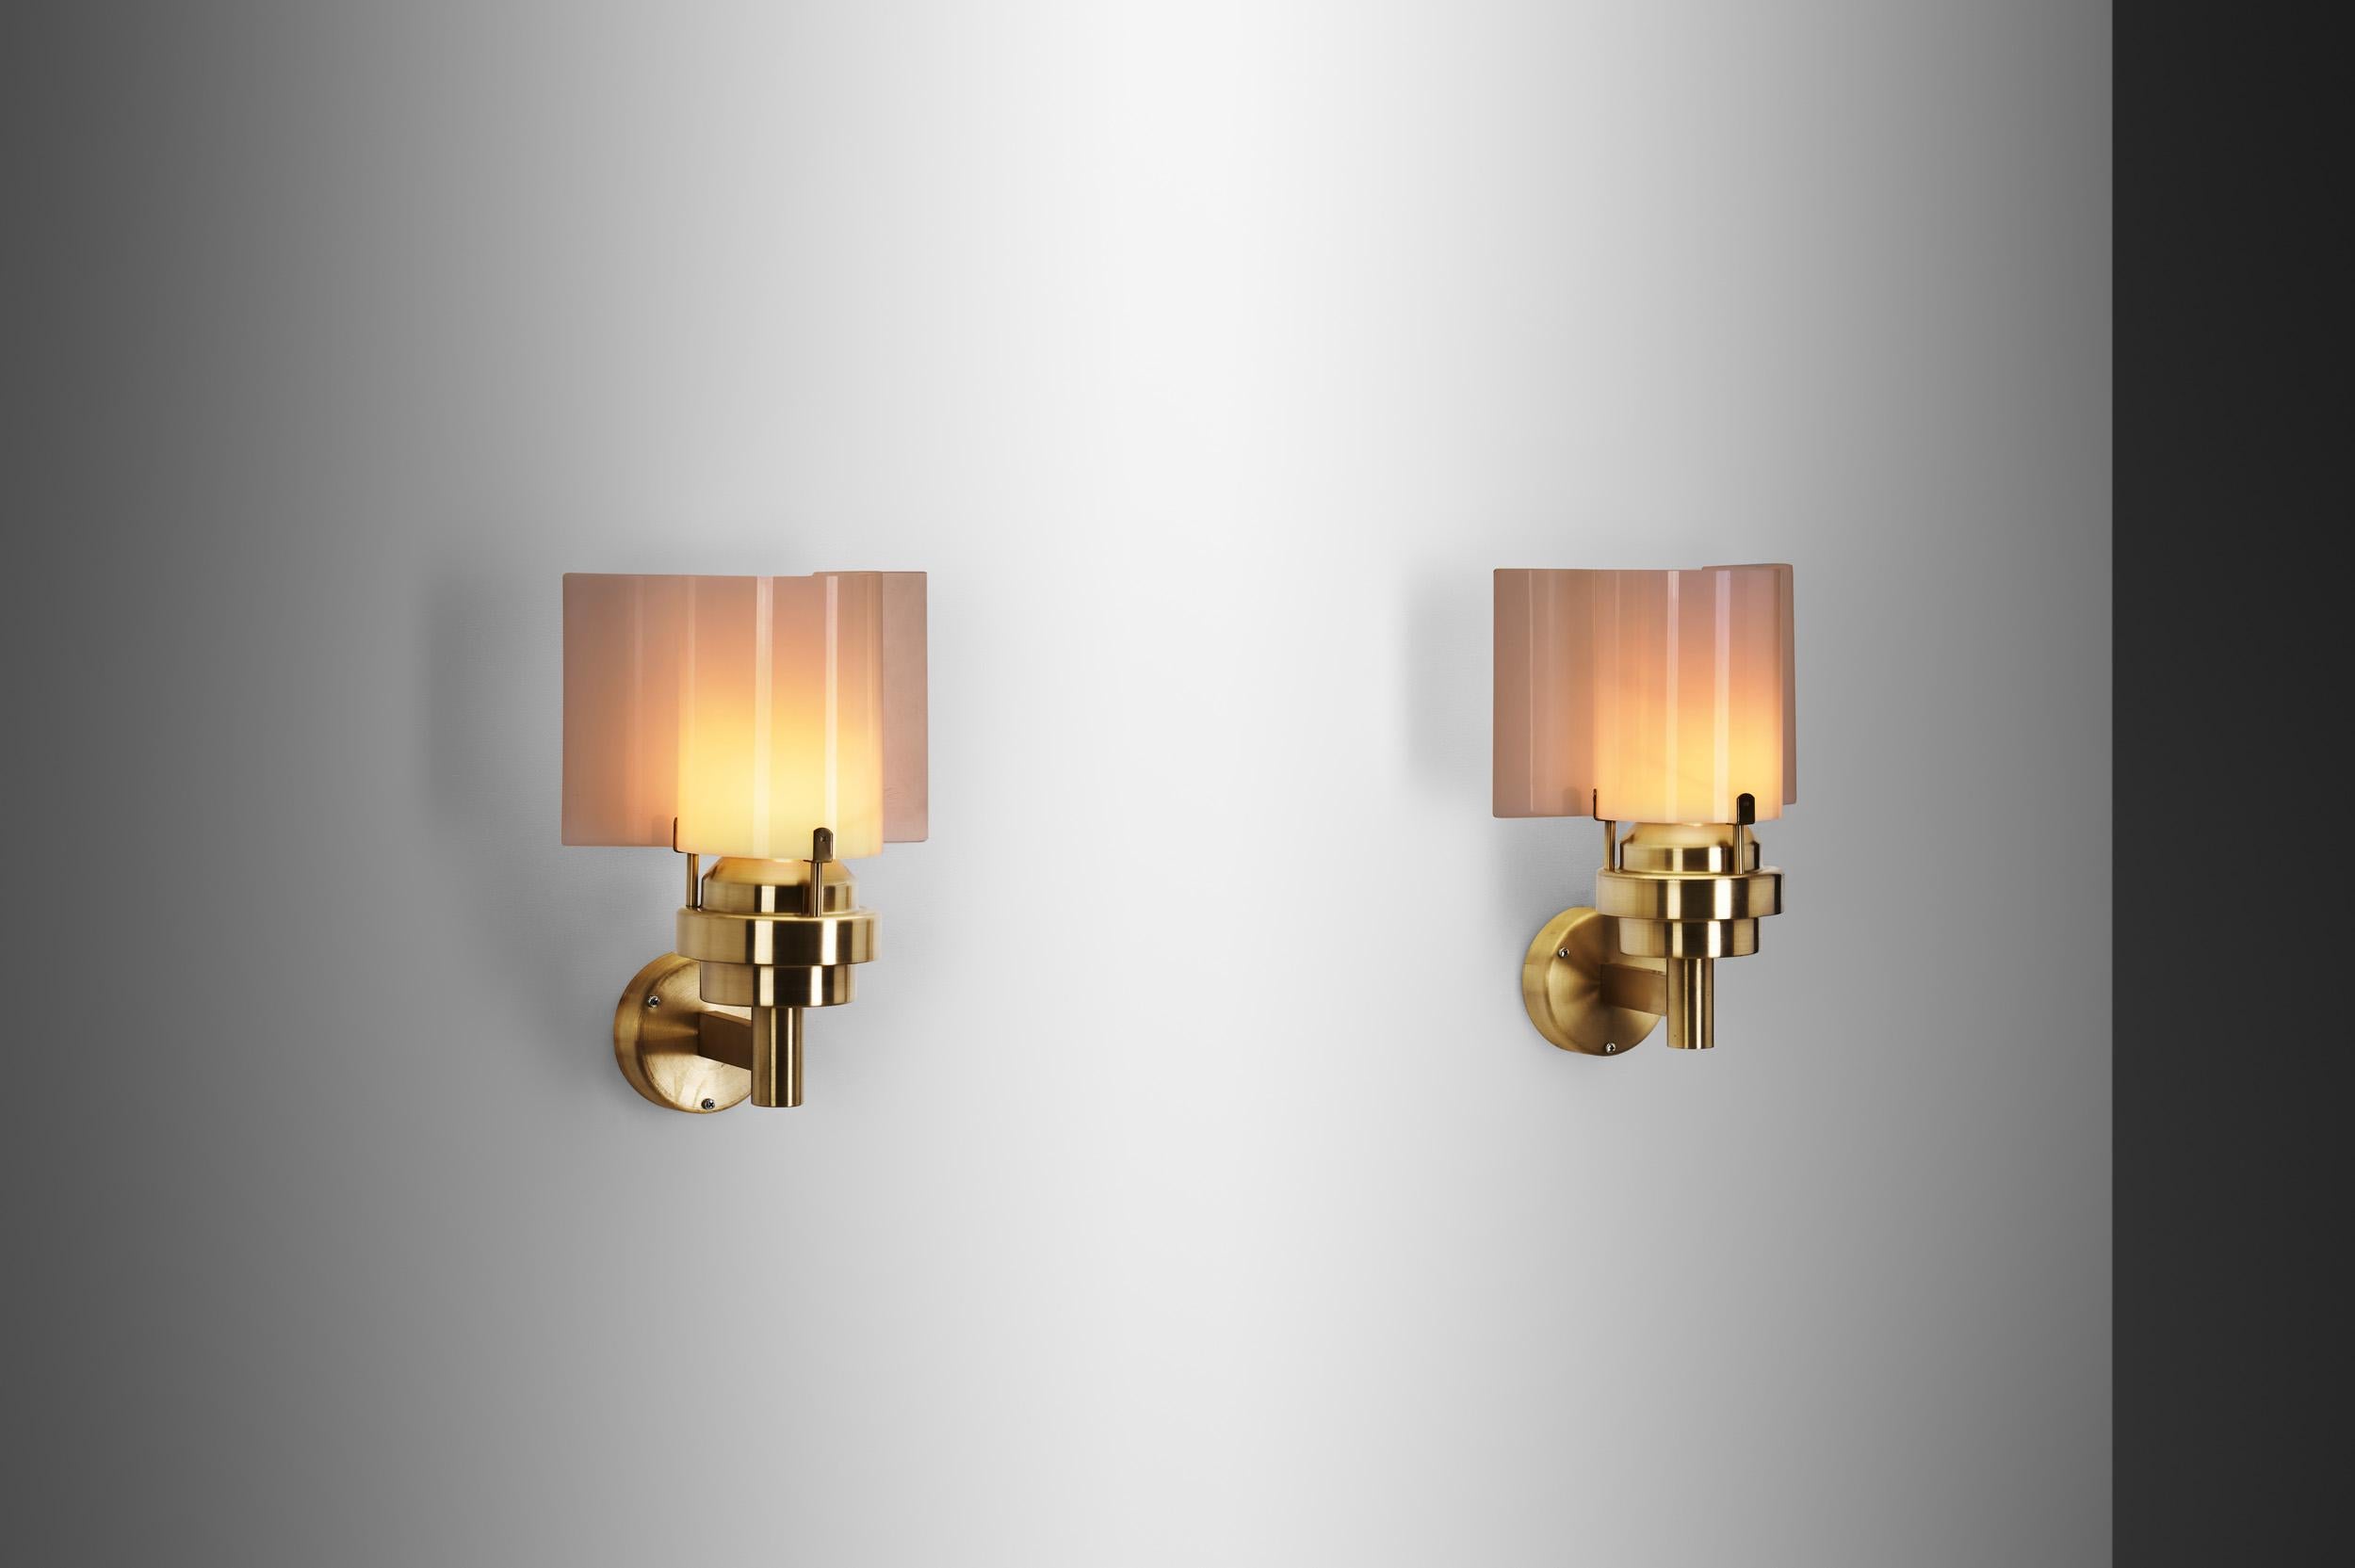 Mid-20th Century Brass and Acrylic Glass Wall Lamps by Stockmann Orno, Finland 1960s For Sale